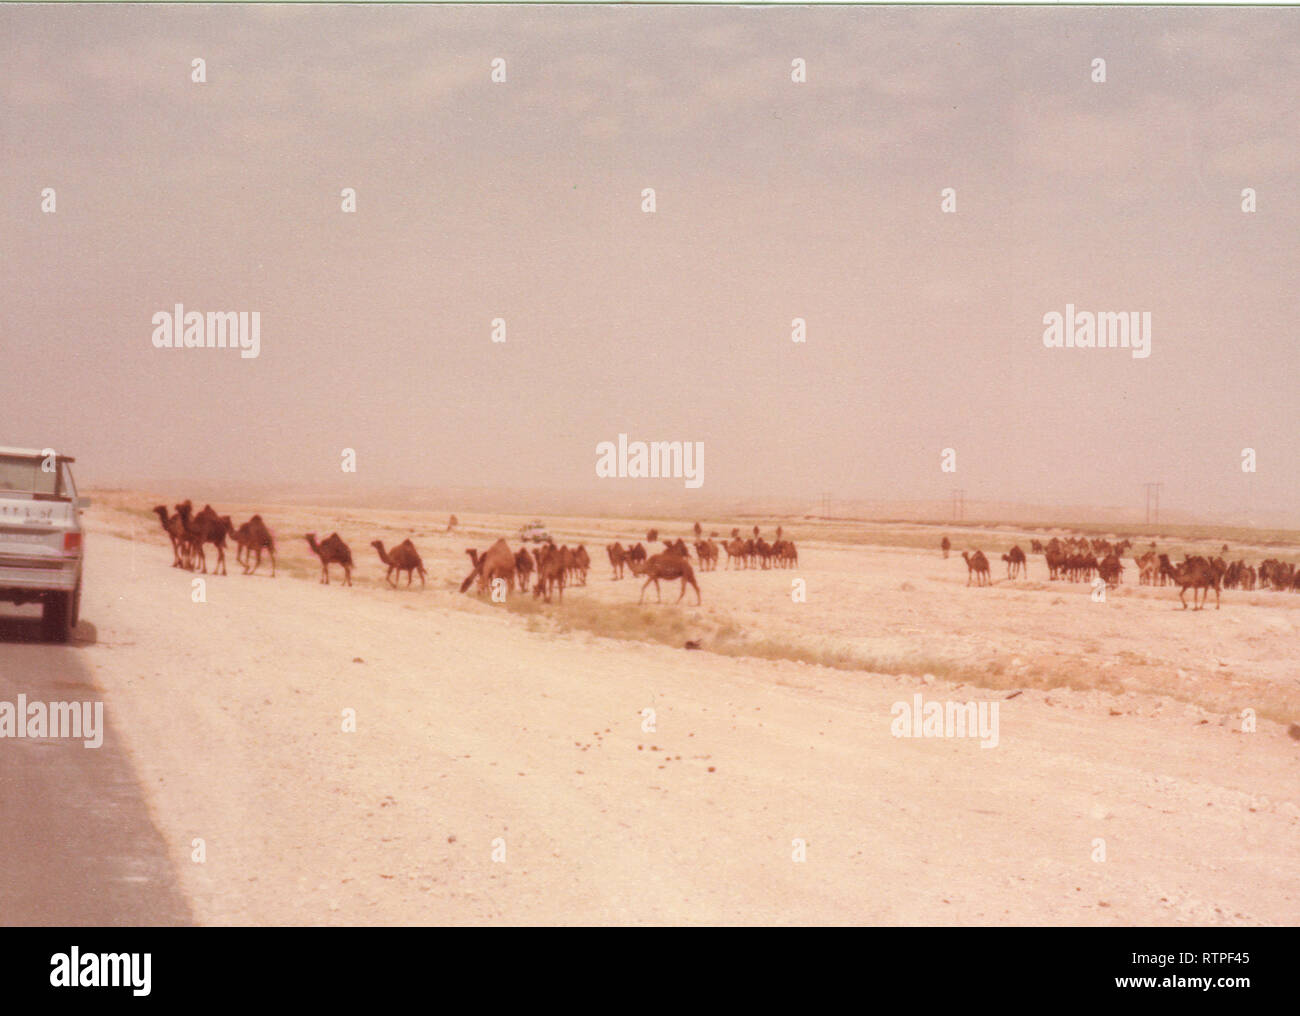 Camels graze and move at their shepherd's direction near Quarrayah Beach, outside of Abqaiq, Saudi Arabia in the late 70s. Stock Photo